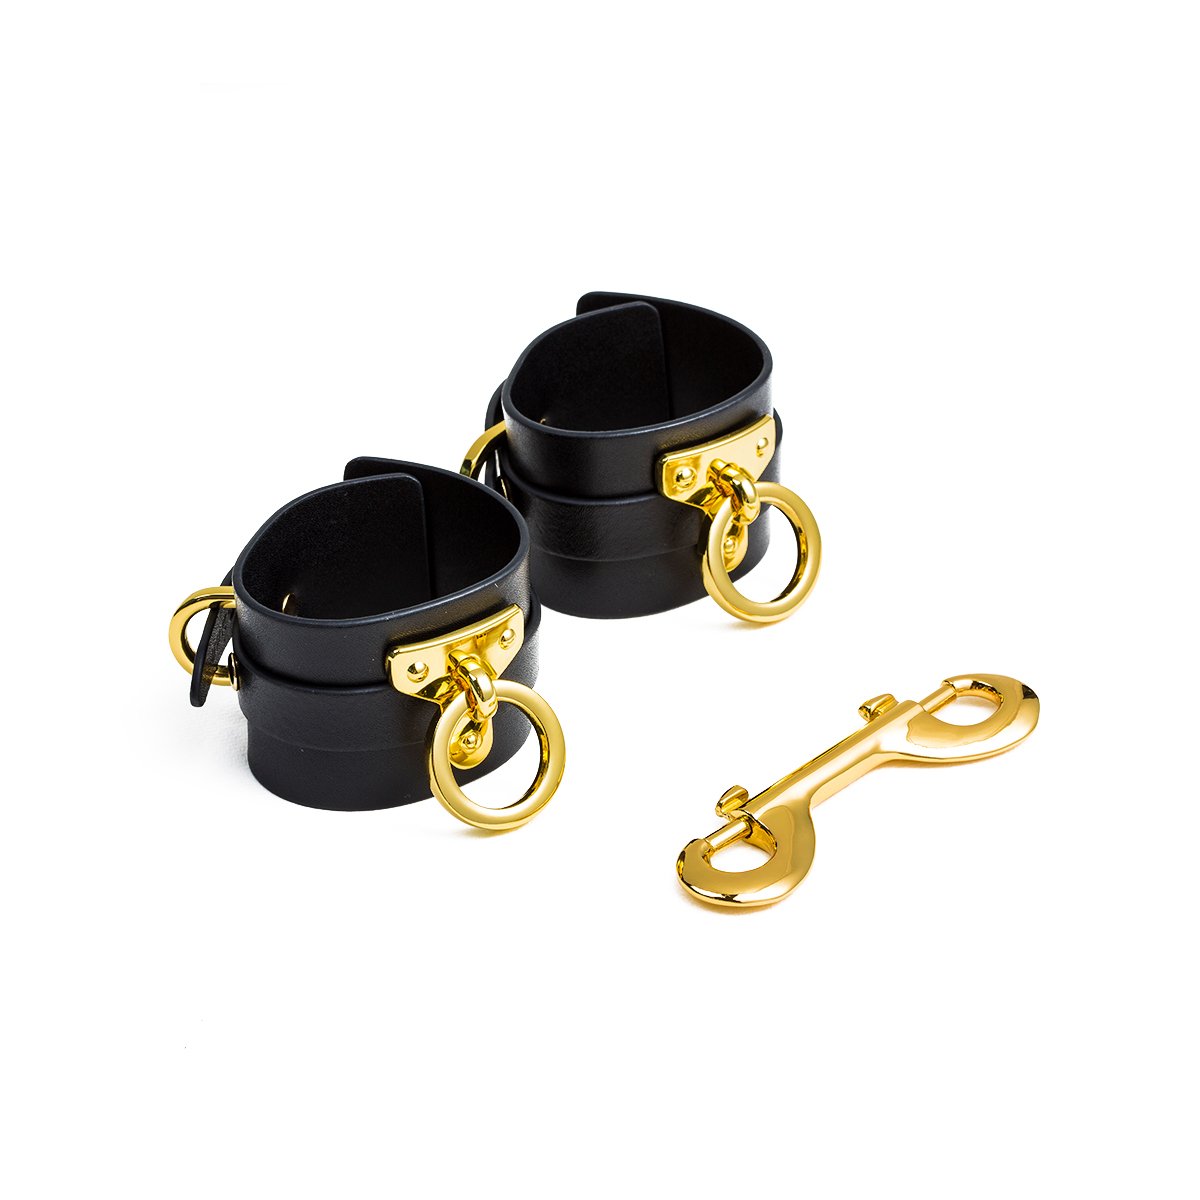 Luxury Italian Leather Spreader Bar, Handcuffs, and Ankle Cuffs Set by UPKO